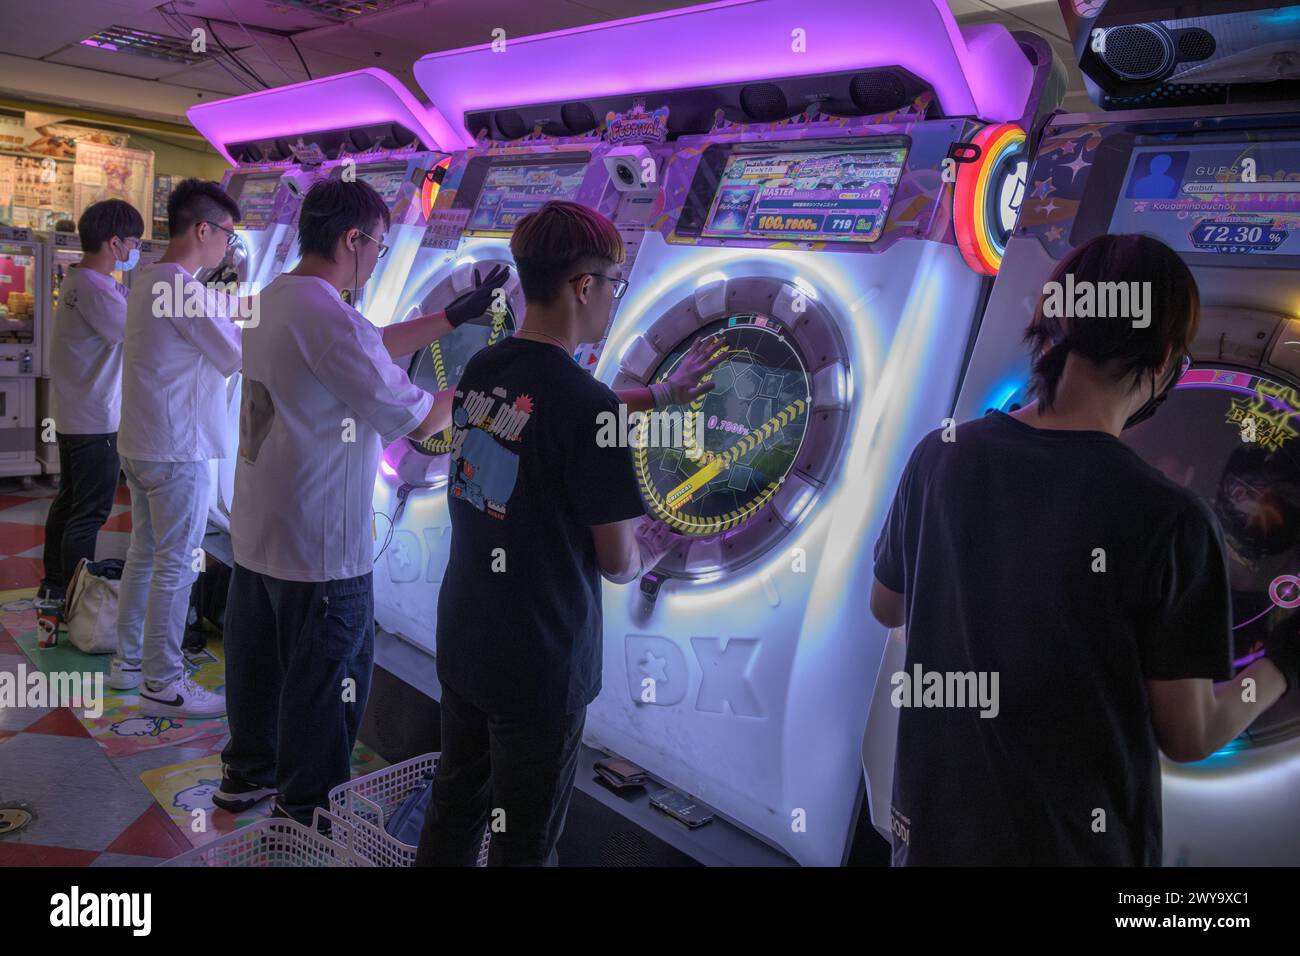 Group of friends engaged in intense arcade gaming on a neon-lit rhythm machine, enjoying leisure time in Taipei city mall Stock Photo